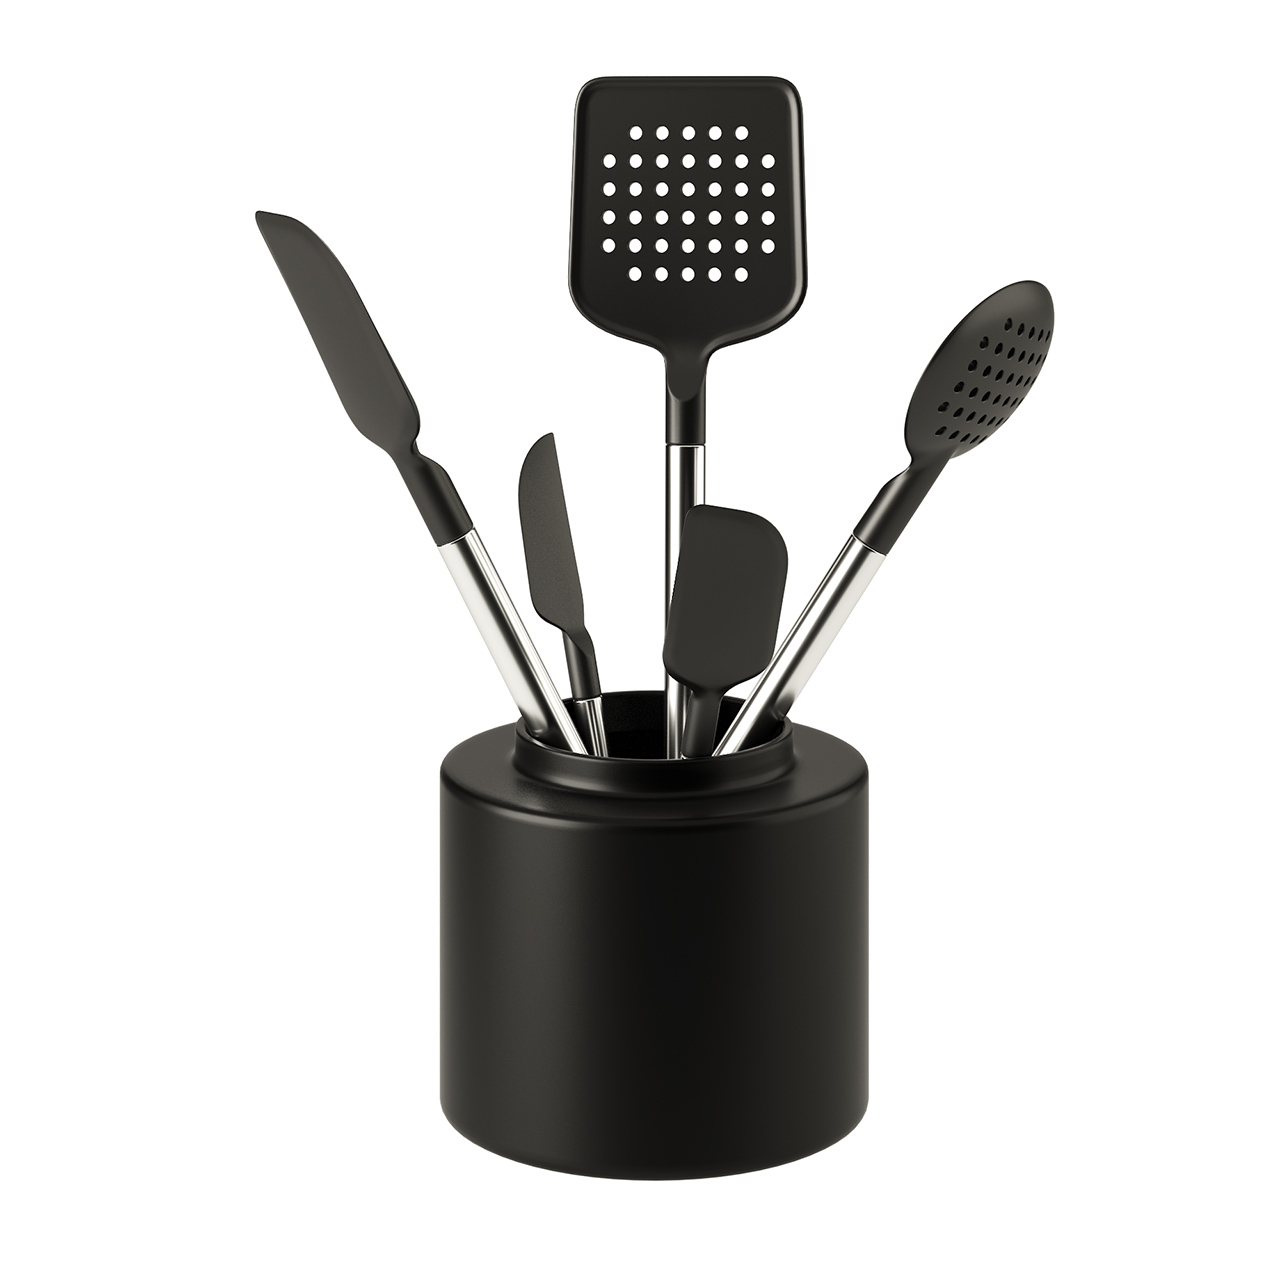 Black Silicone & Steel Utensils by Crate & Barrel